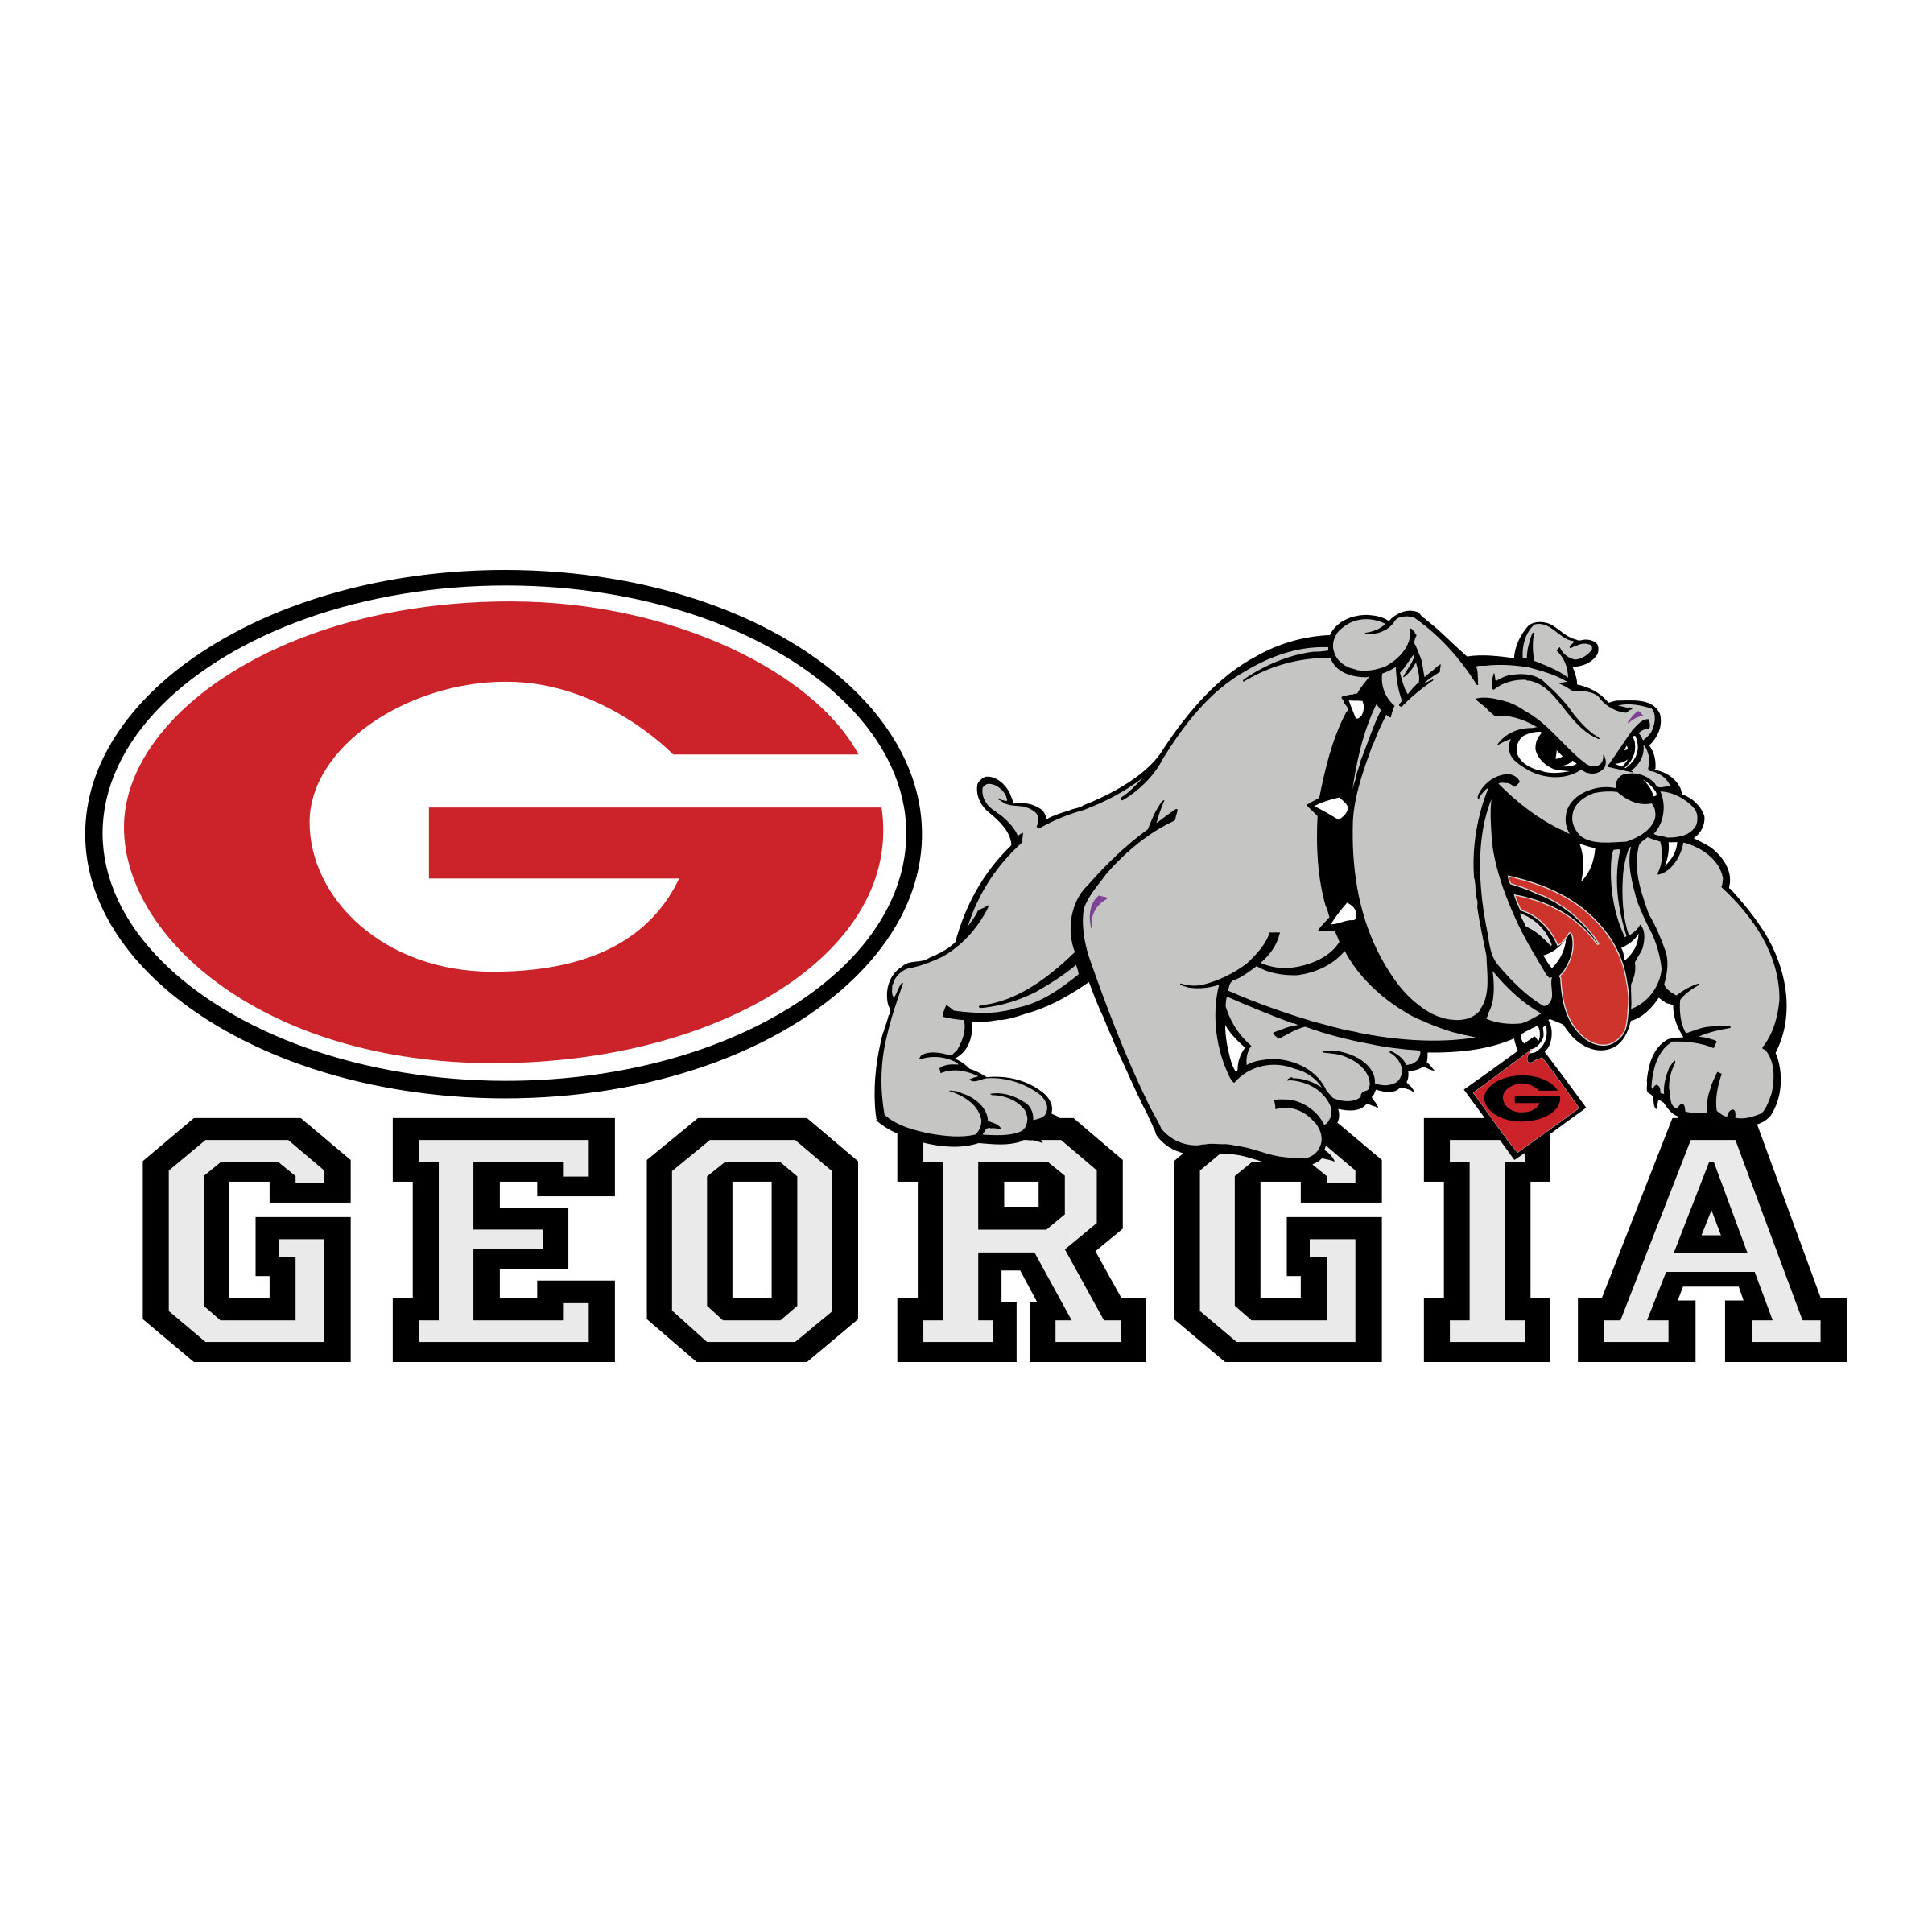 Download georgia logo png 10 free Cliparts | Download images on ...